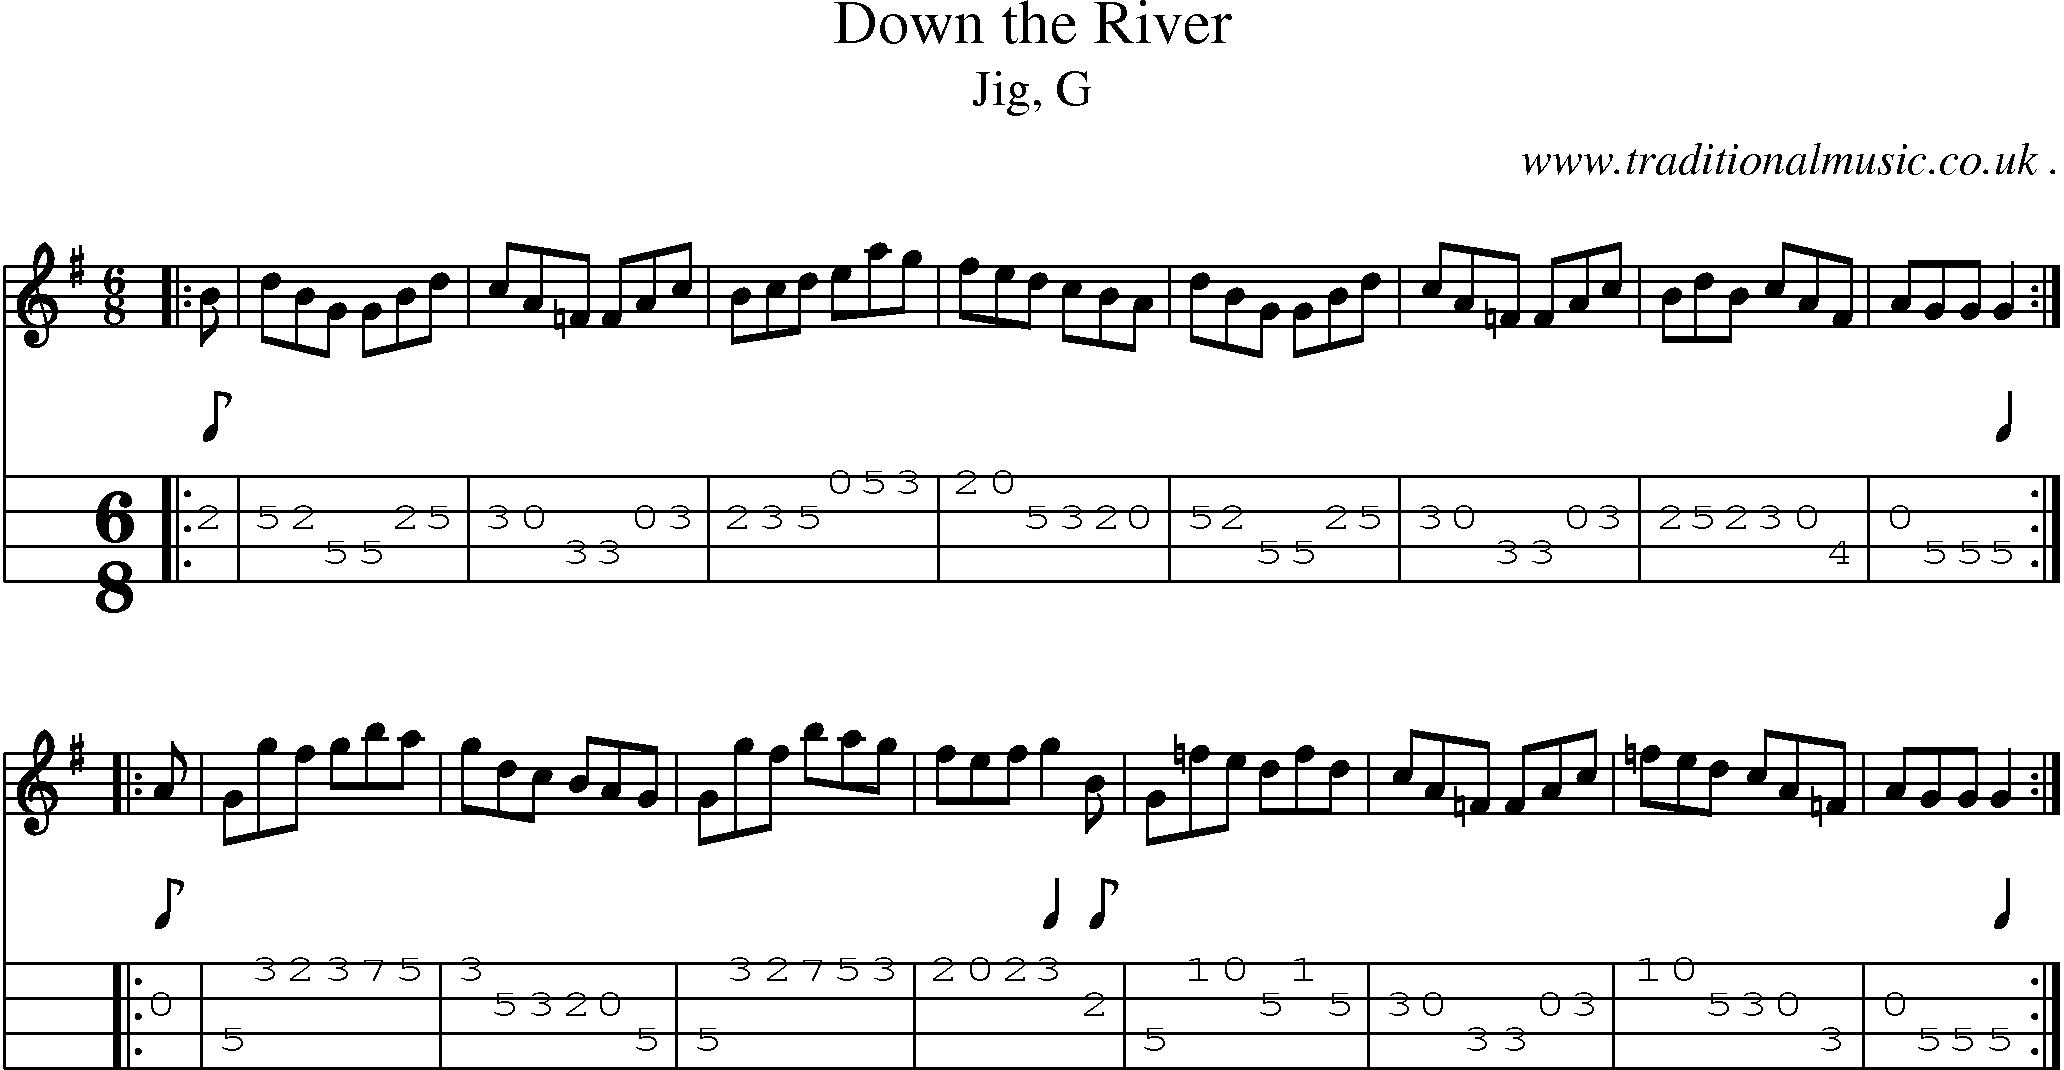 Sheet-music  score, Chords and Mandolin Tabs for Down The River